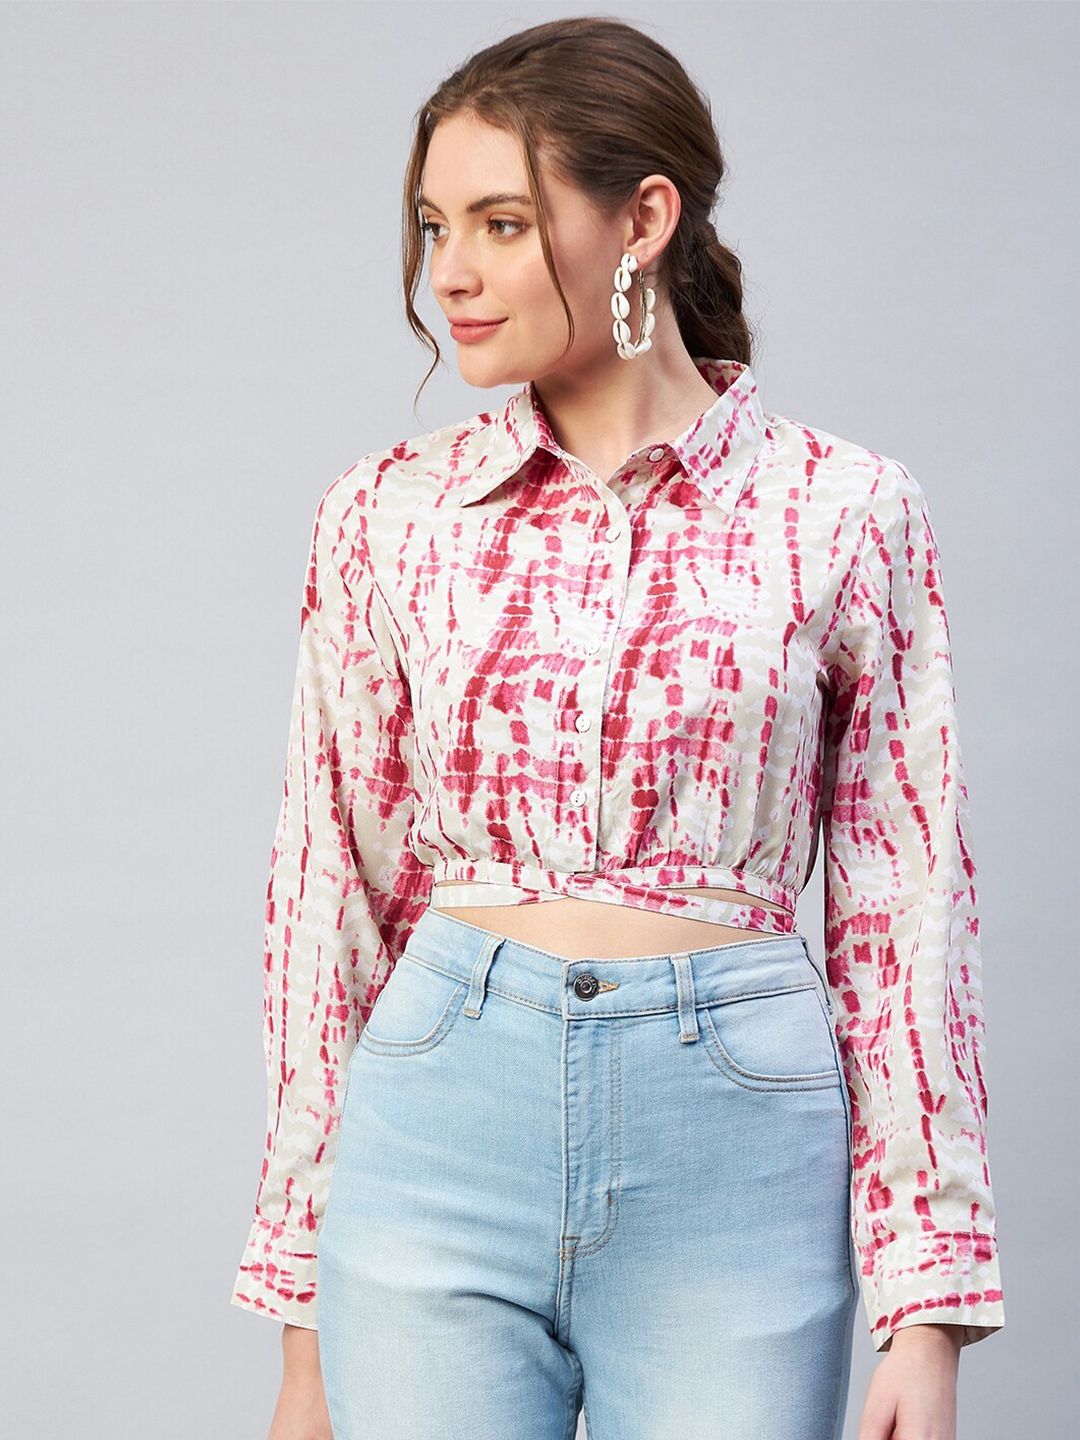 Marie Claire Pink Tie and Dye Crepe Shirt Style Crop Top Price in India